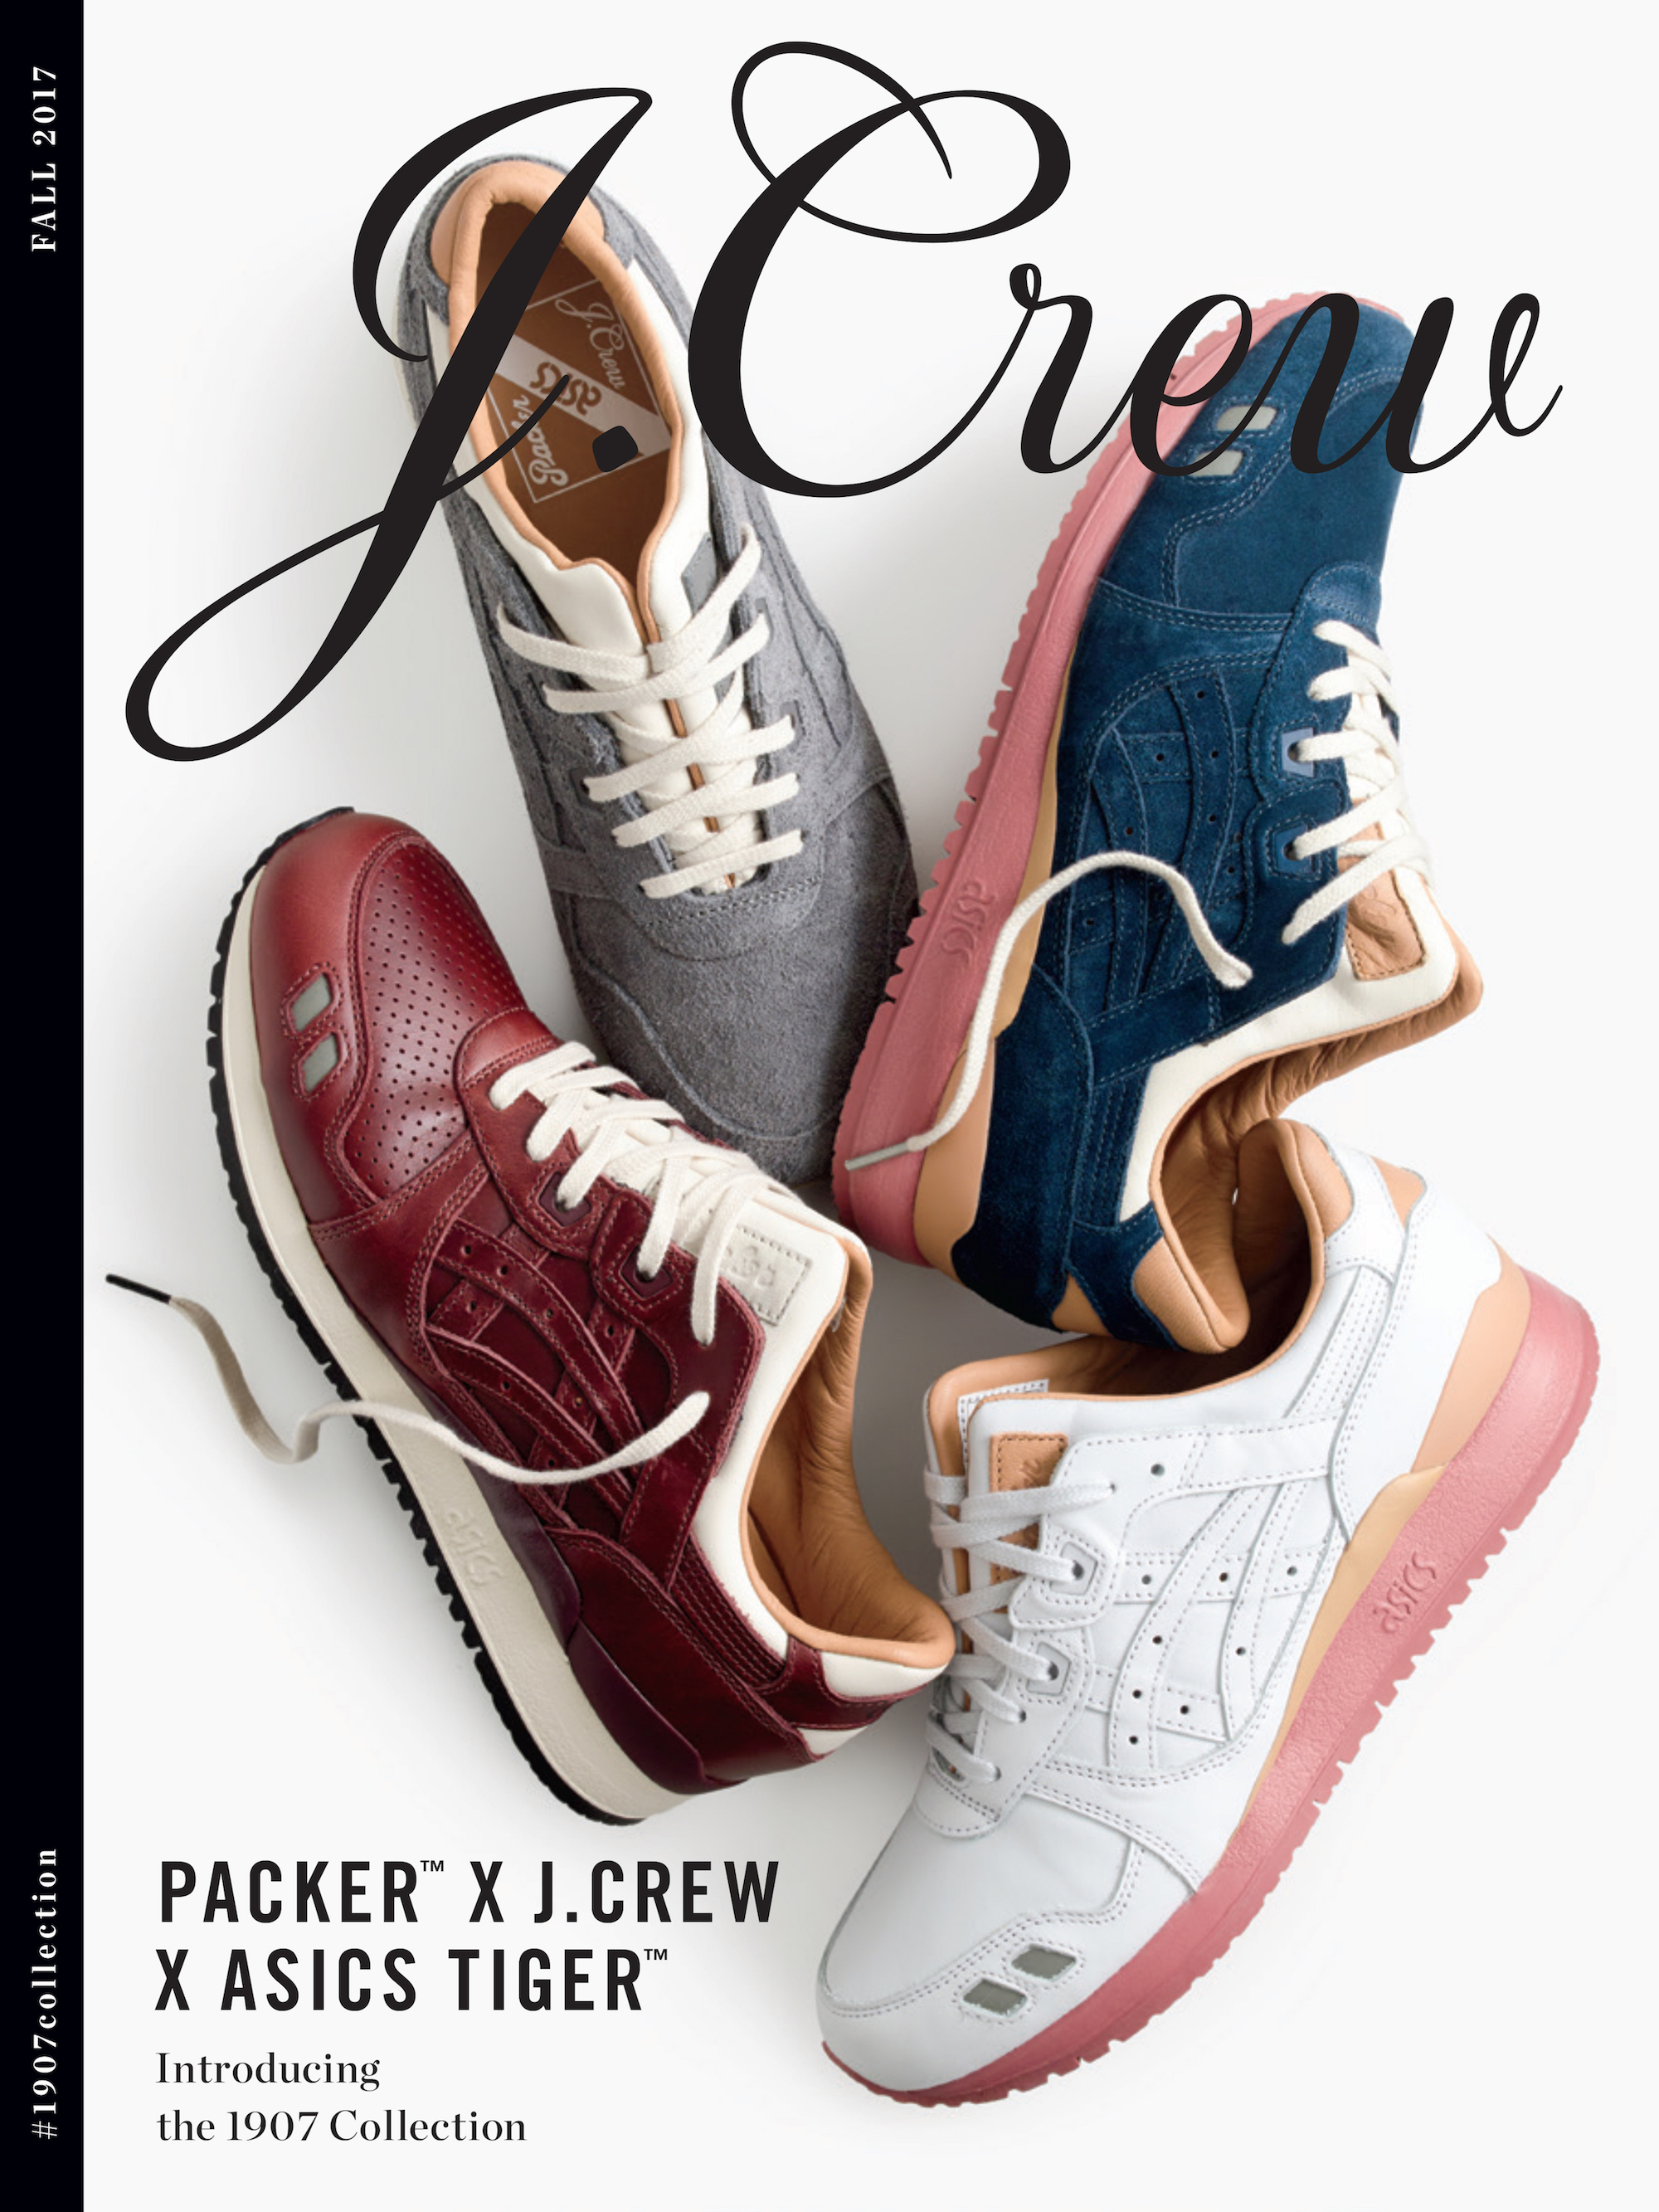 packer shoes jcrew asics tiger 1907 collection 2